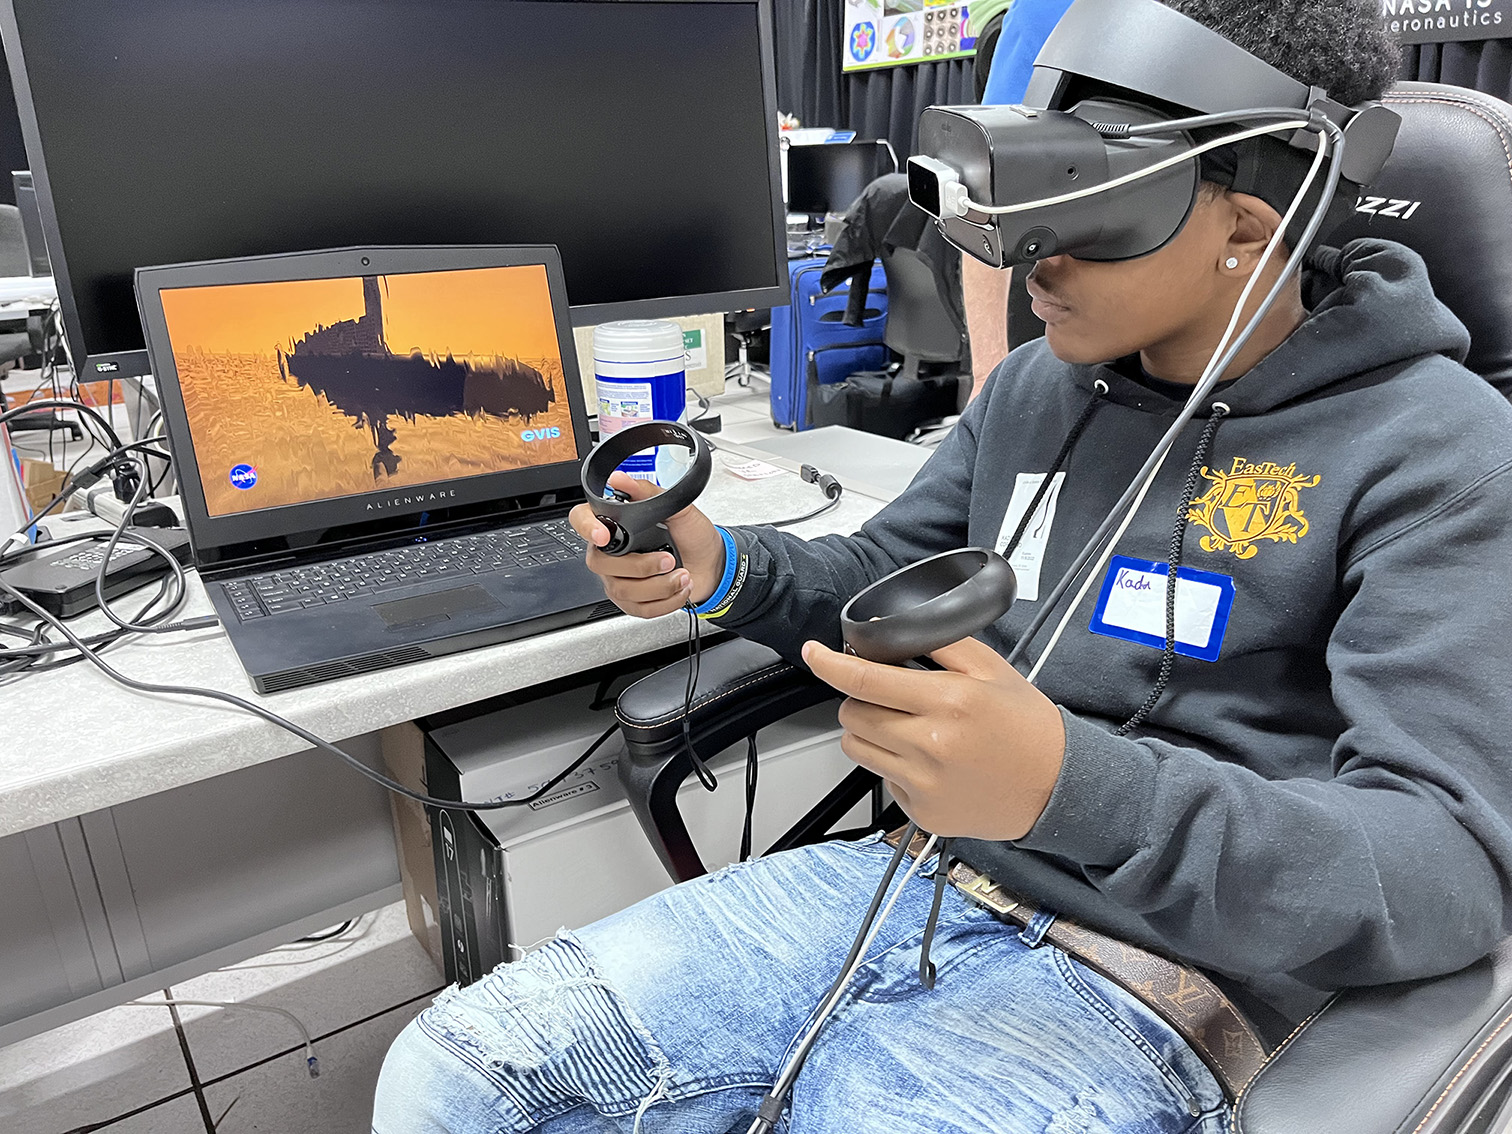 Student using a VR system